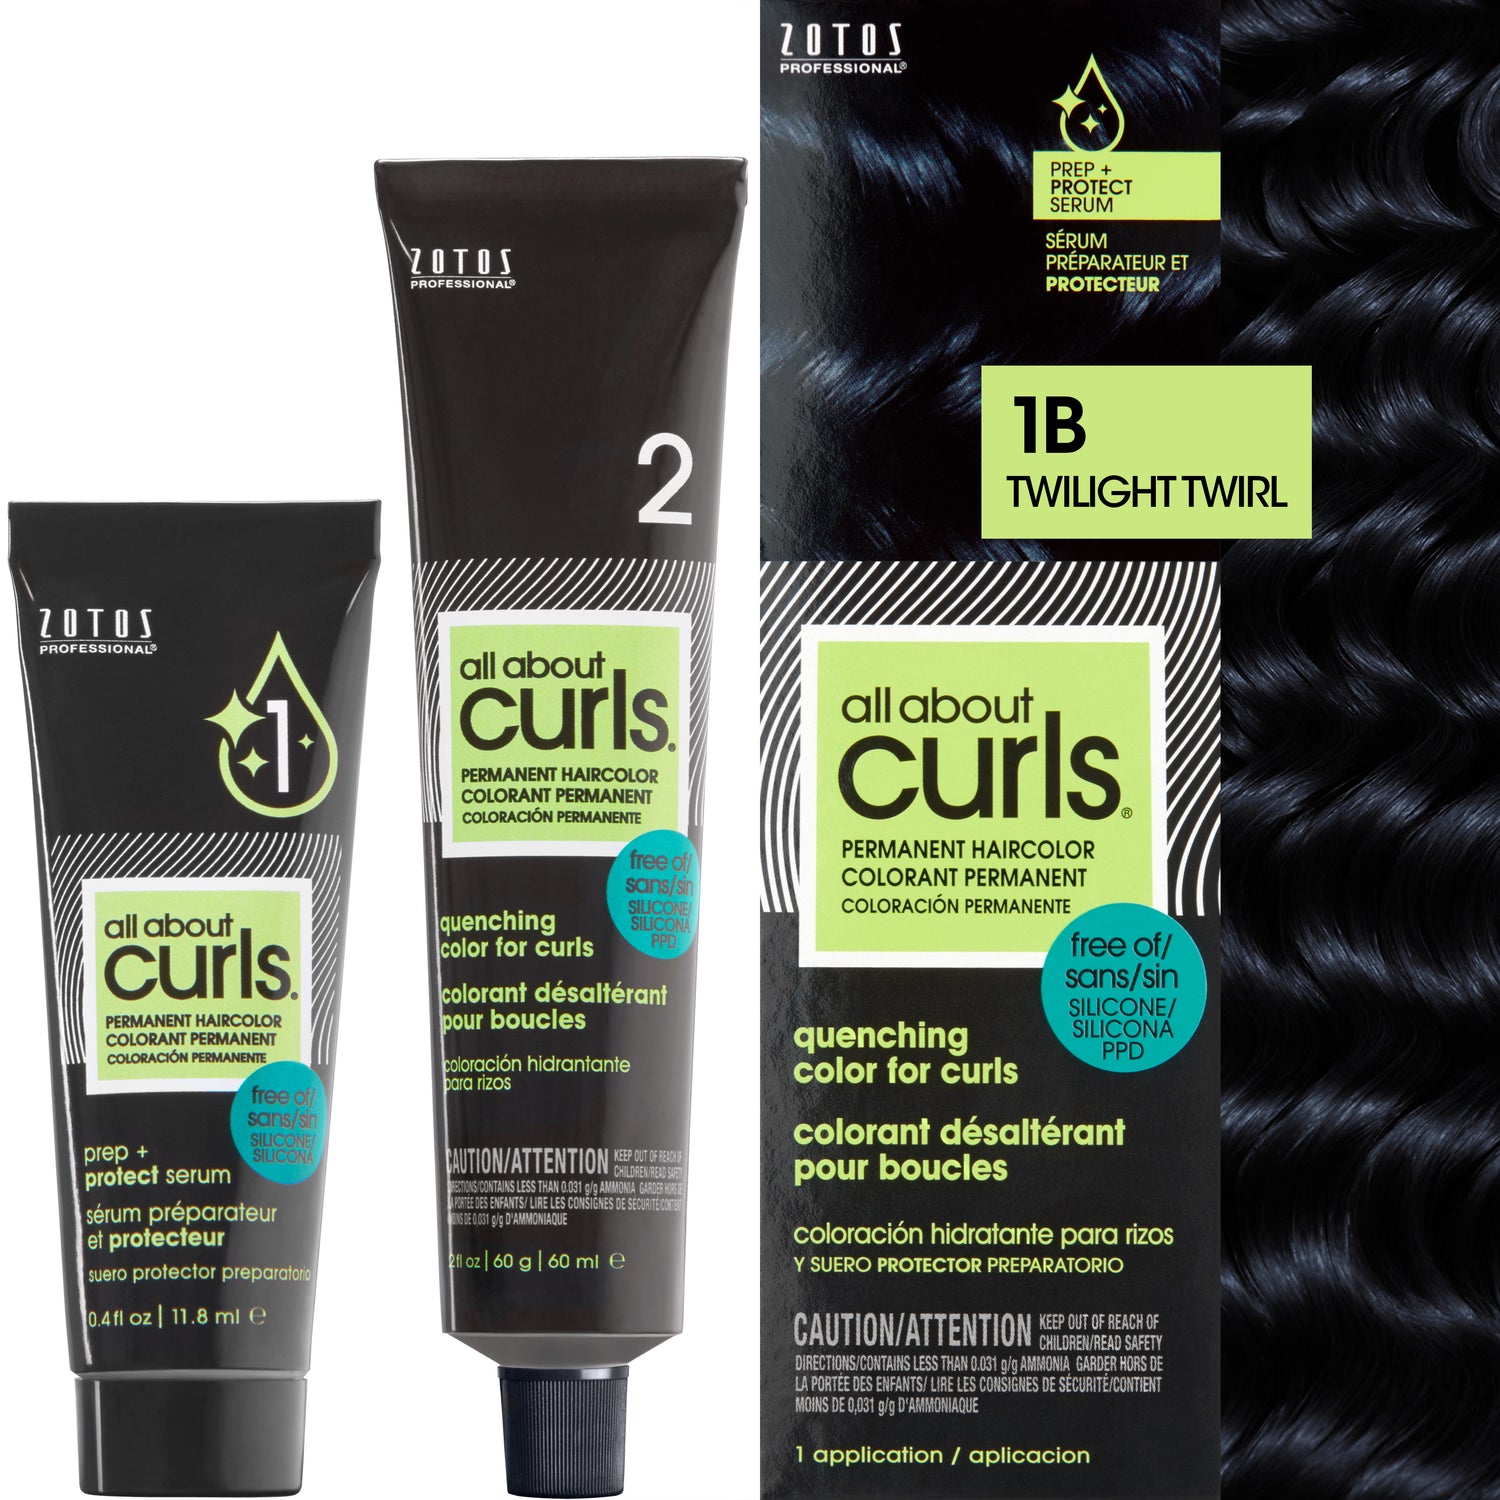 Two bottles and packaging for All About Curls Permanent Color in shade 1B Twilight Twirl.